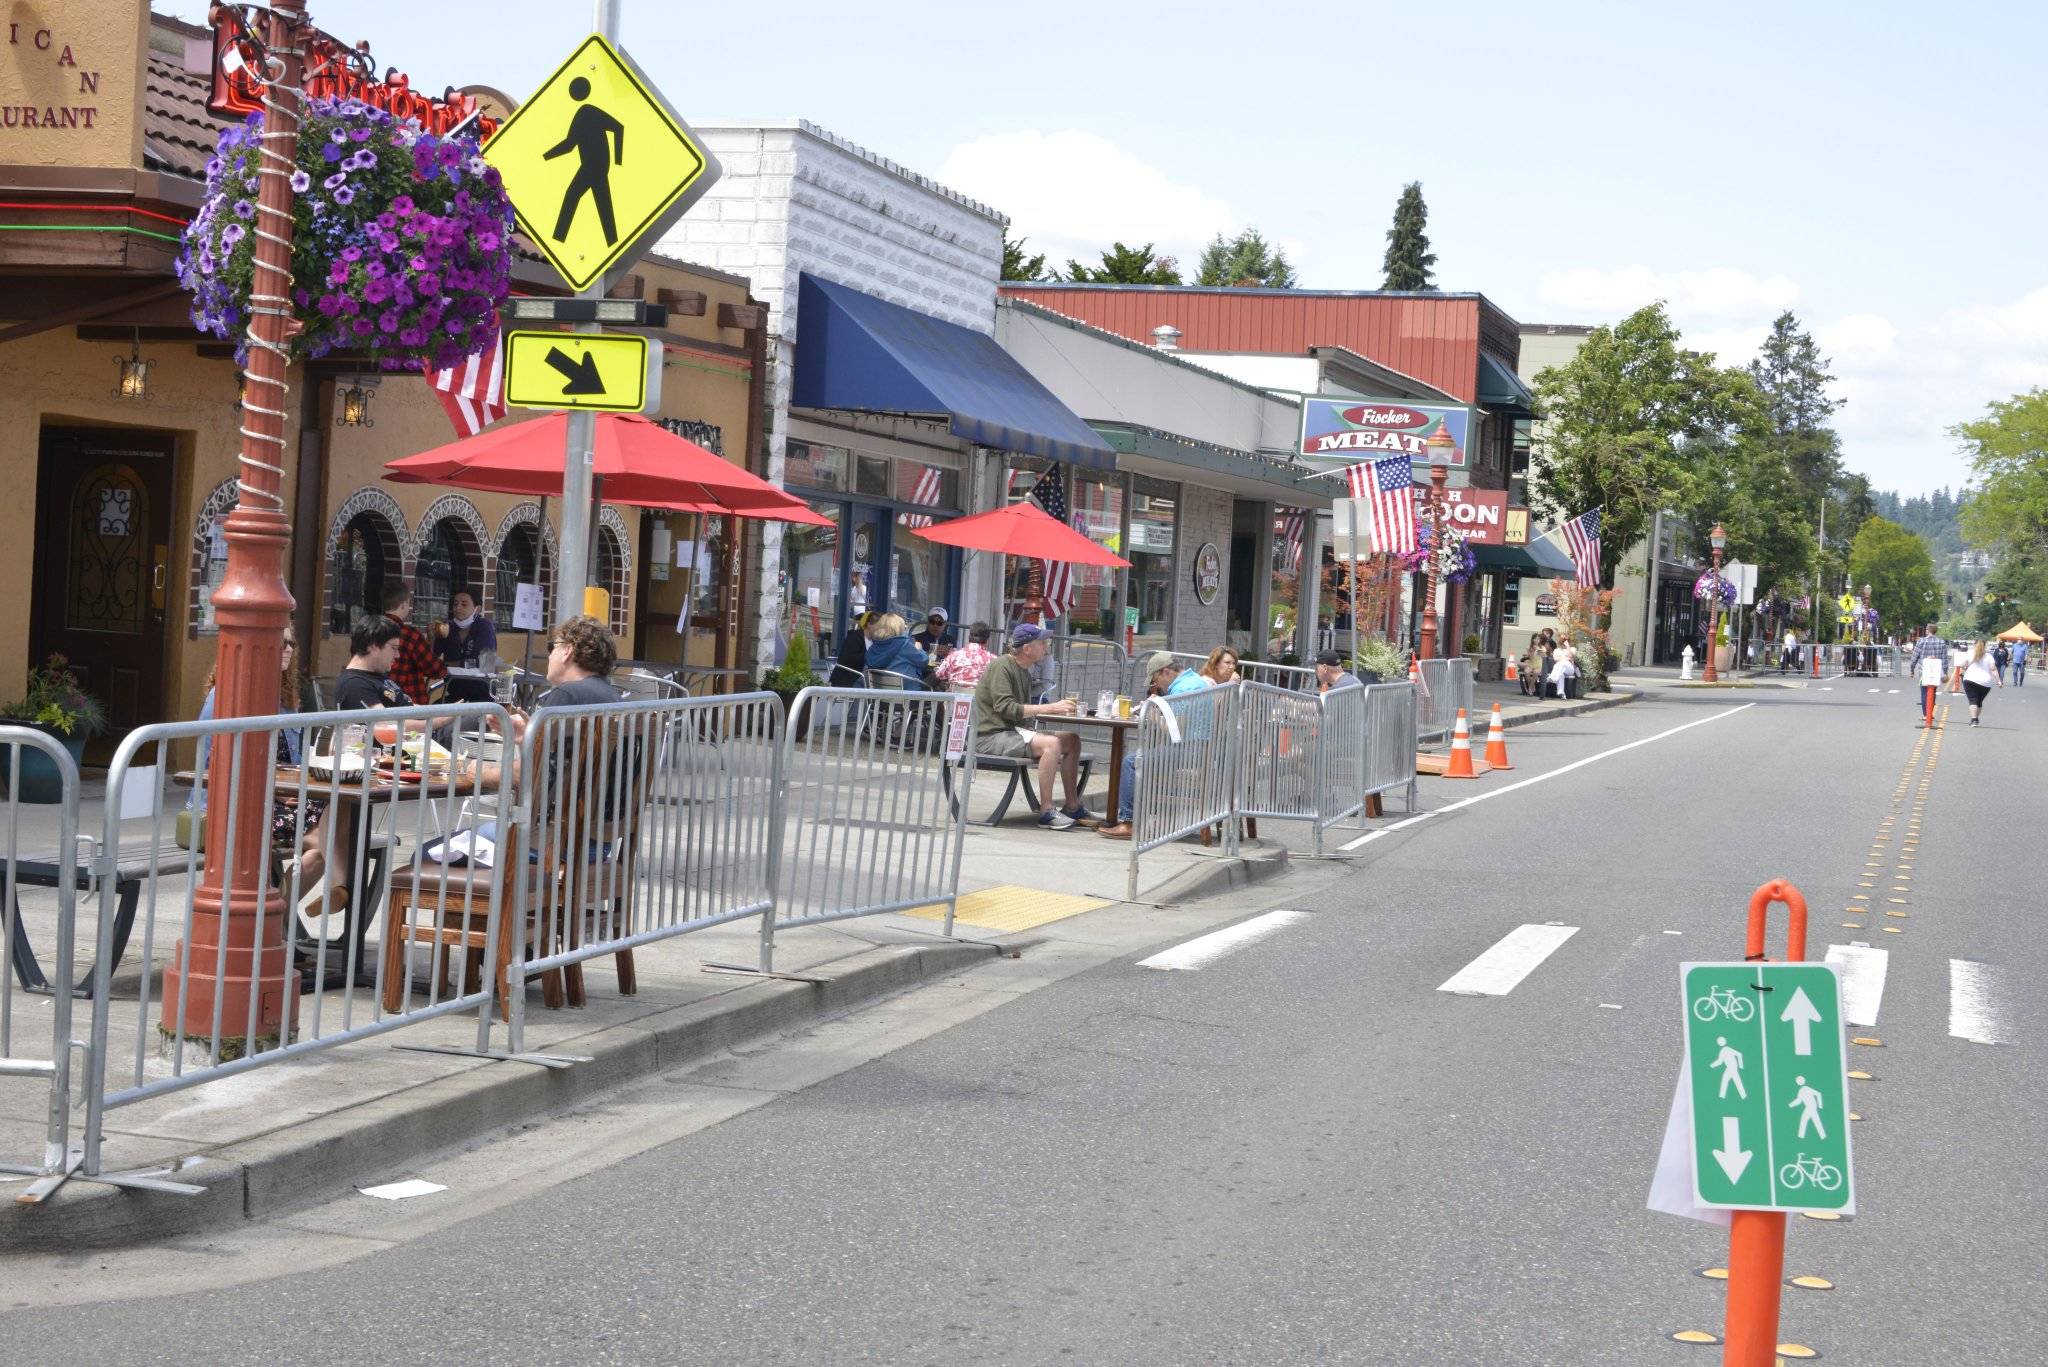 The ‘Streatery’ is back in action. Courtesy photo/City of Issaquah